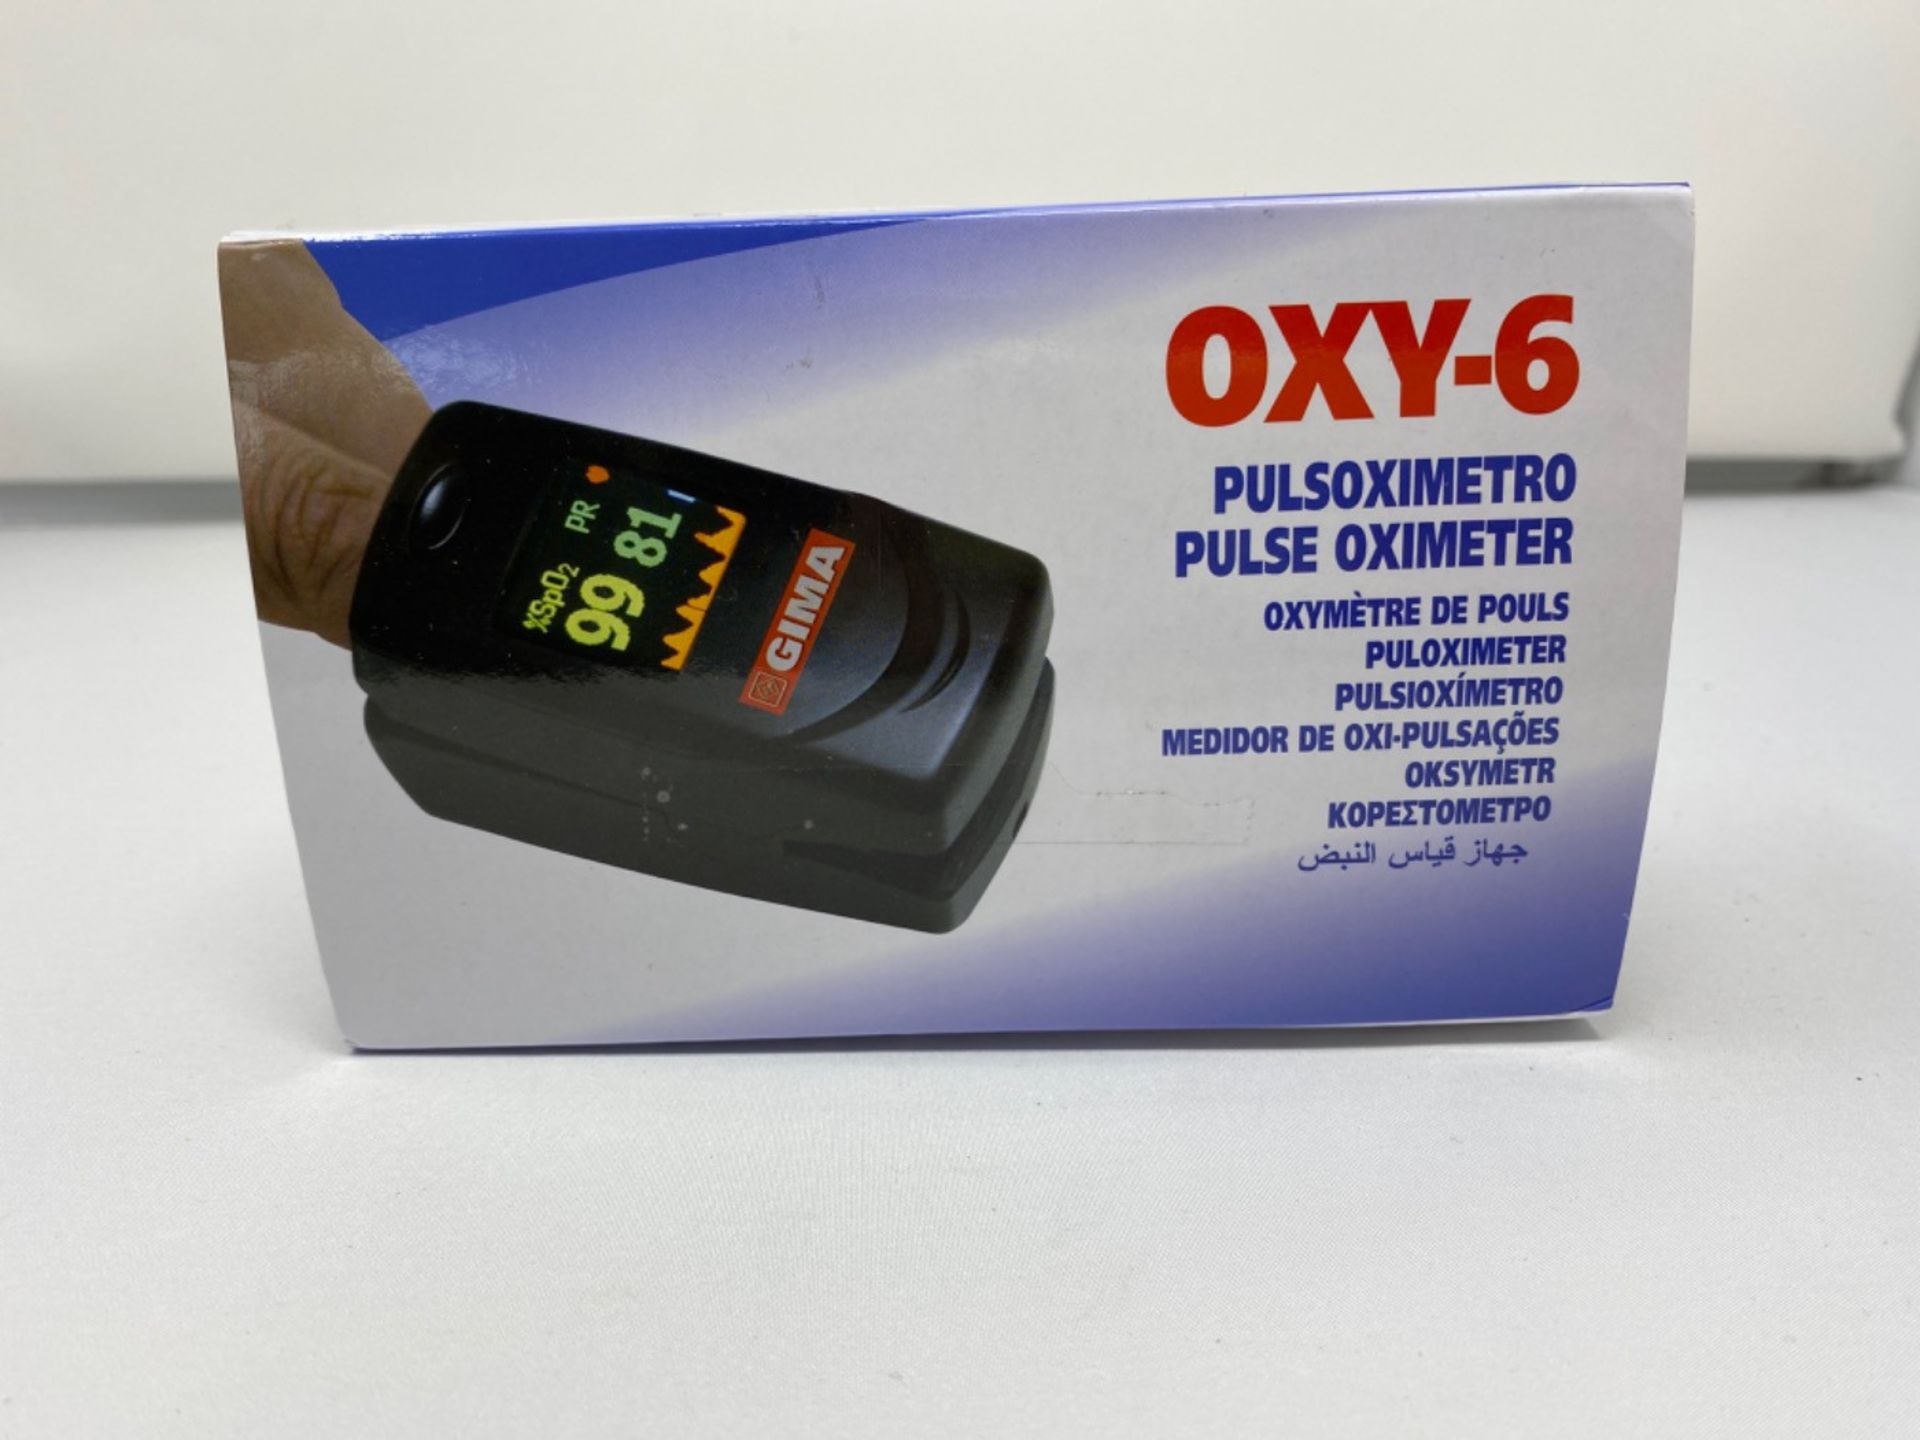 GIMA Oxy-6 Fingertip Pulse Oximeter, Diameter 10-22 mm, Portable, Detects Saturation, - Image 2 of 3